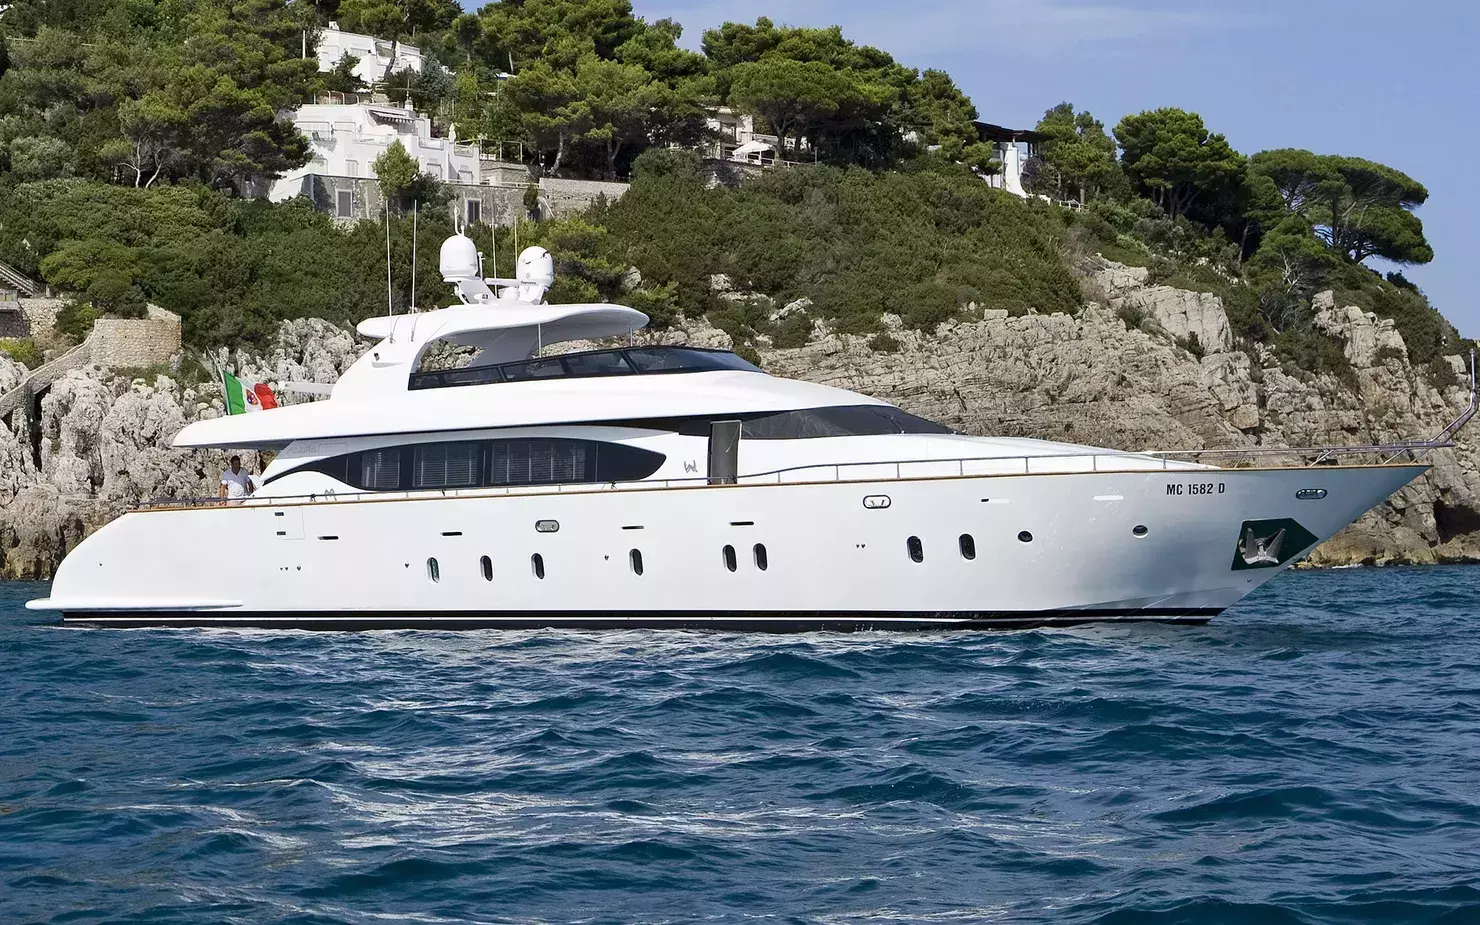 Nikca by Maiora - Top rates for a Charter of a private Motor Yacht in Italy